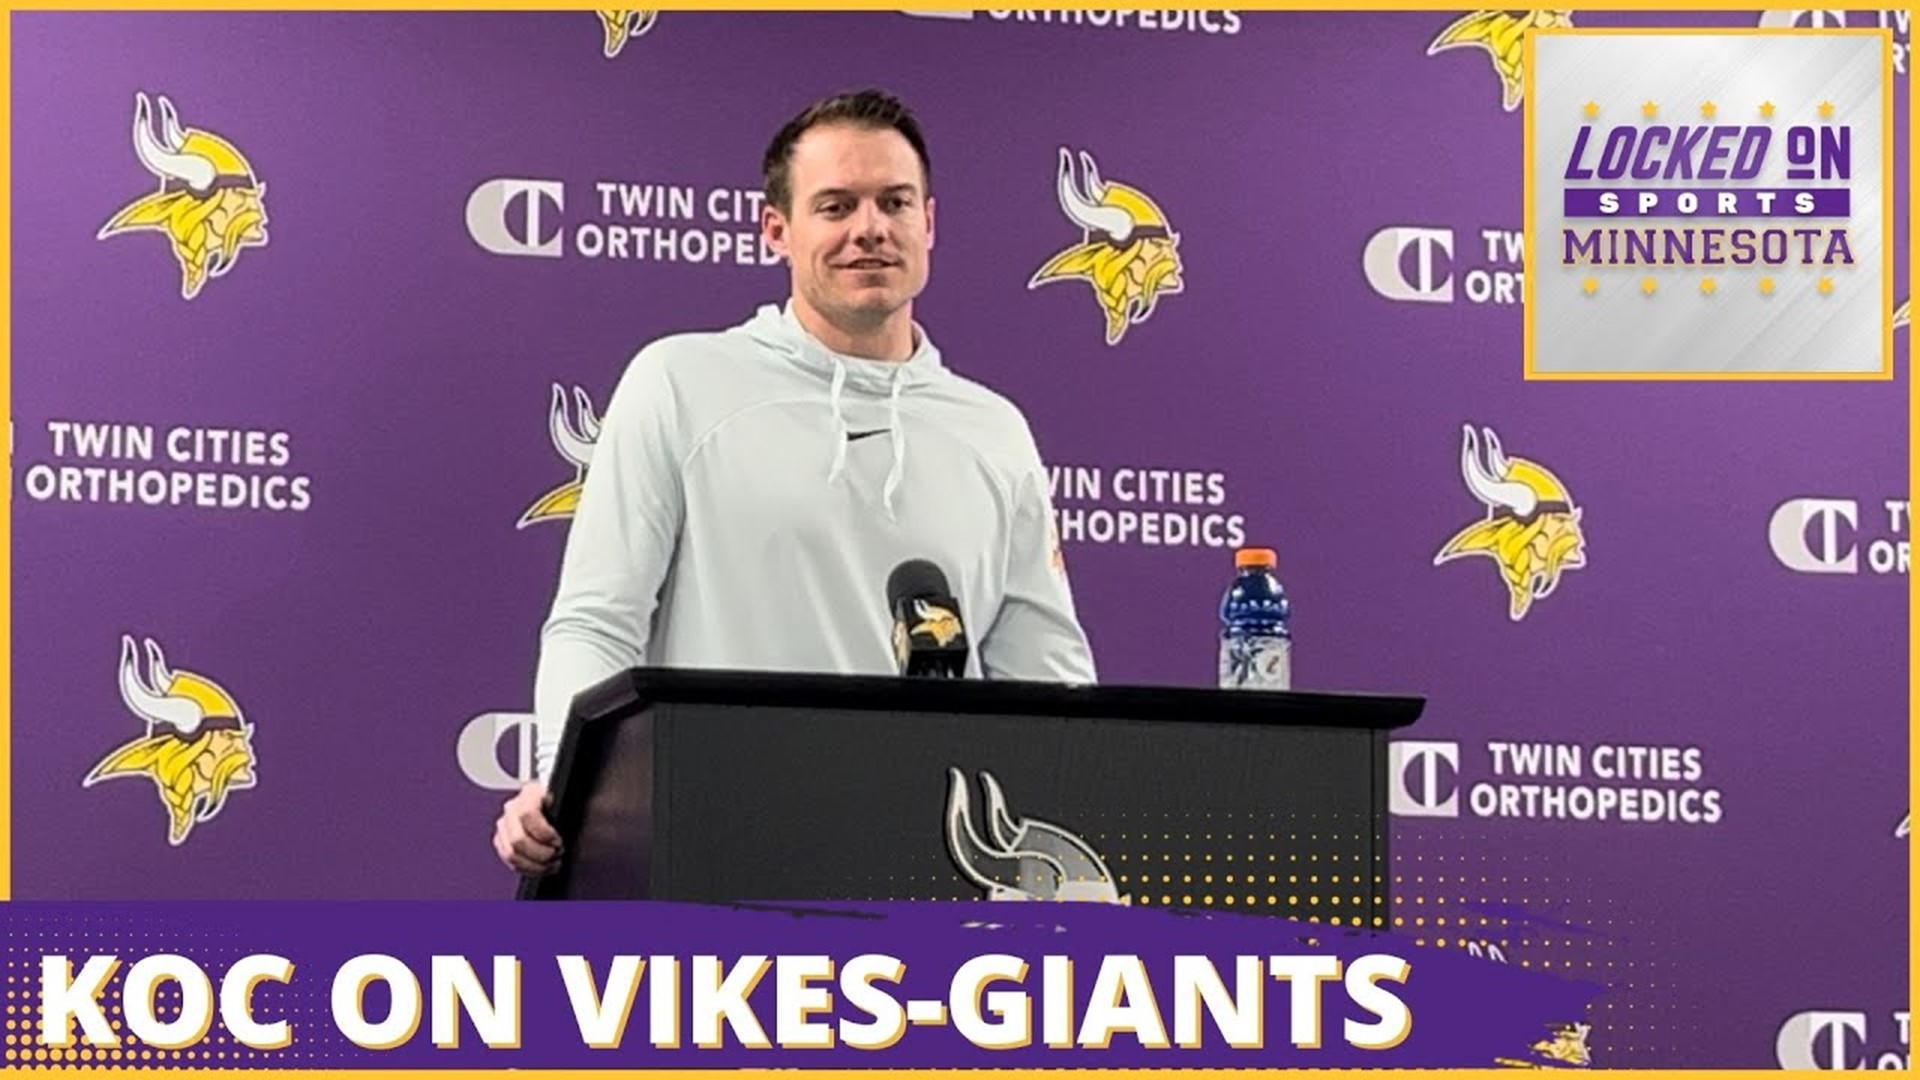 Minnesota Vikings Kevin O'Connell speaks to reporters about the team's preparation as it gets ready to face the New York Giants in the Wild Card round.